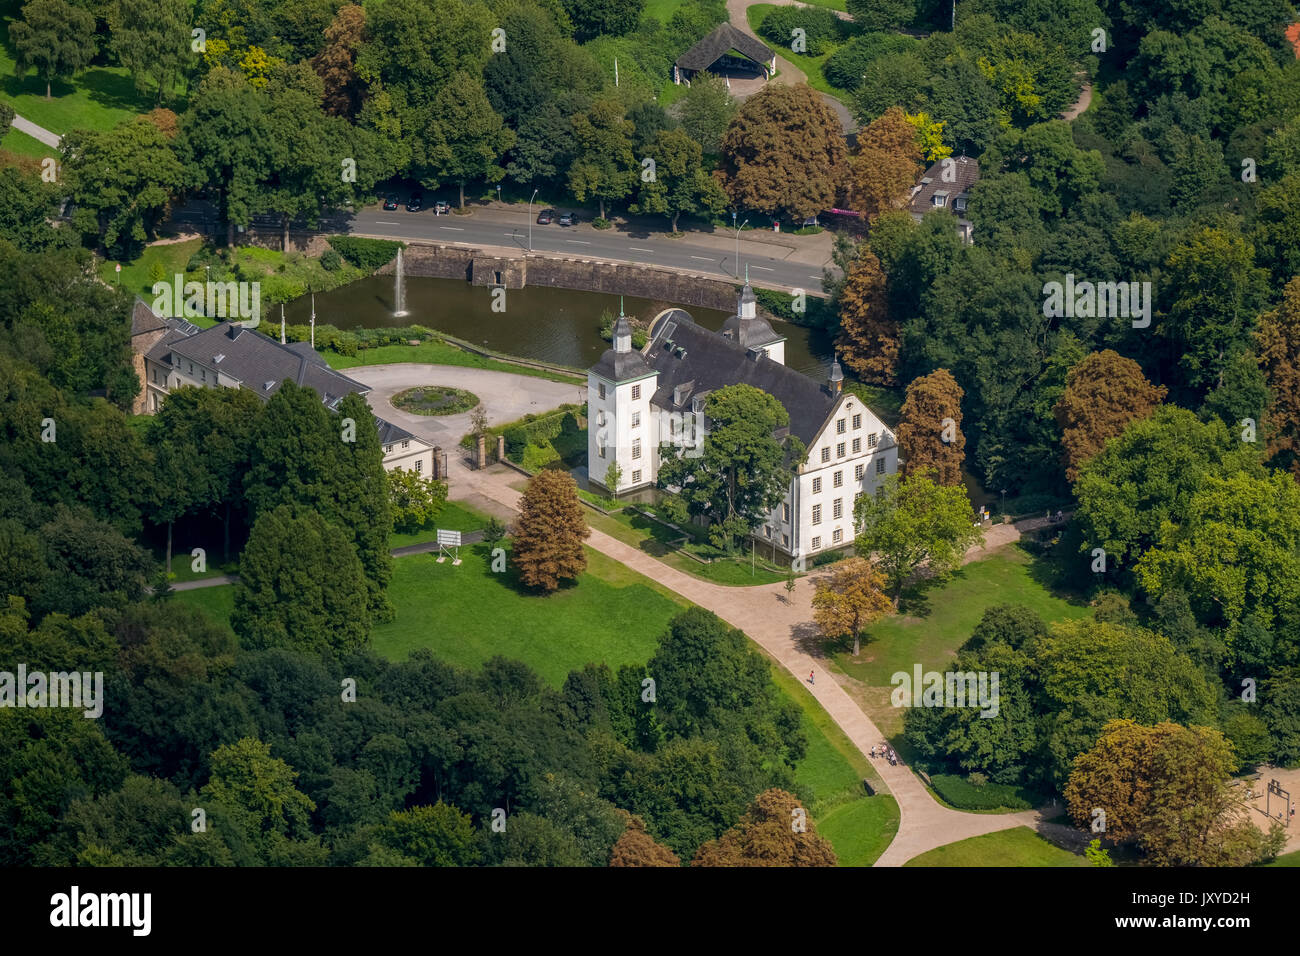 Schloss Borbeck, baroque moated castle, main house and an elongated farm buildings, curly gable, castle park is designed as an English landscape garde Stock Photo